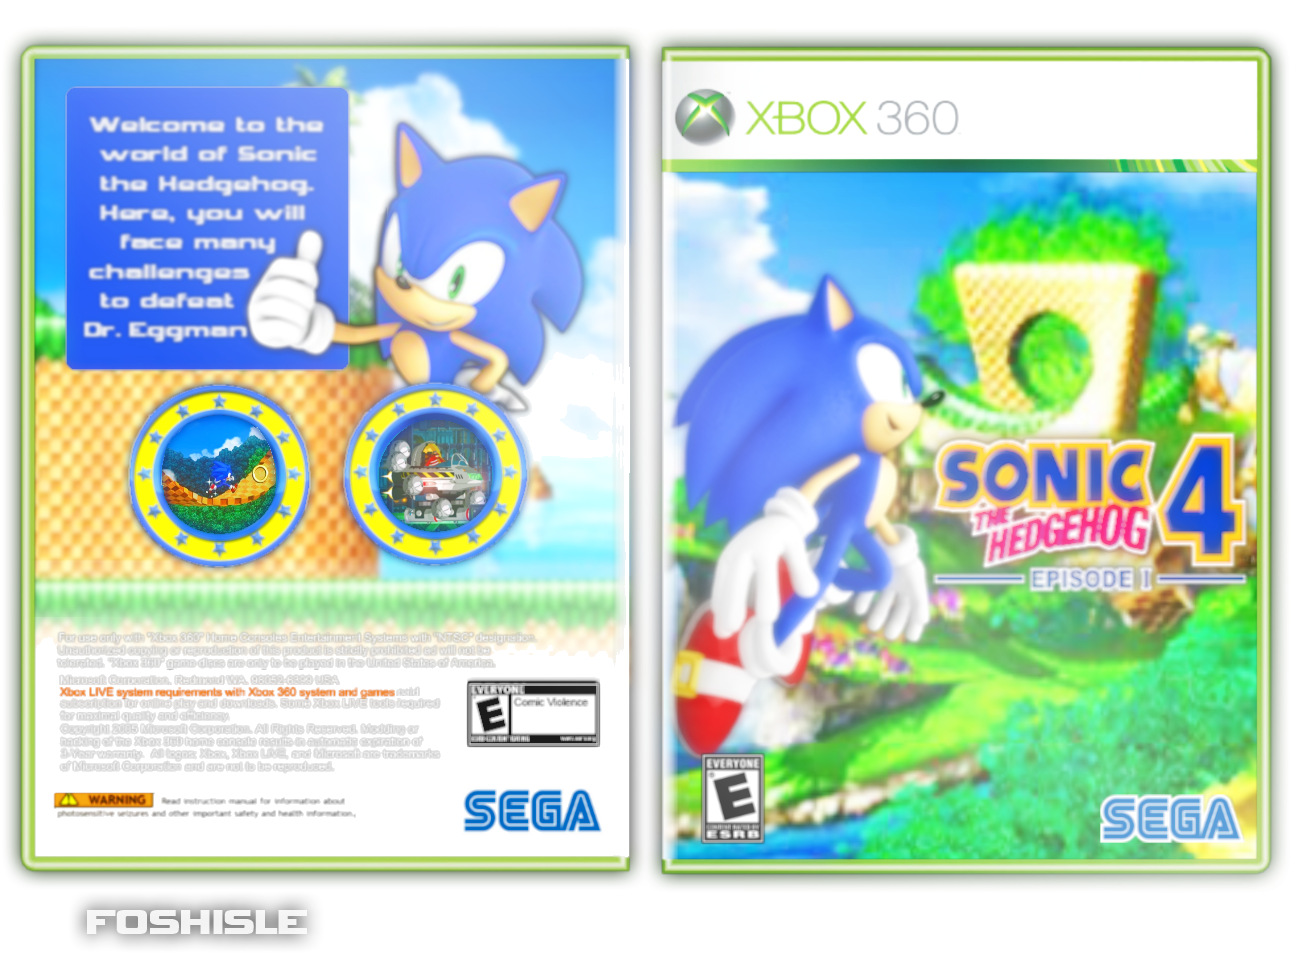 Sonic The Hedgehog 4: Episode 1 box cover